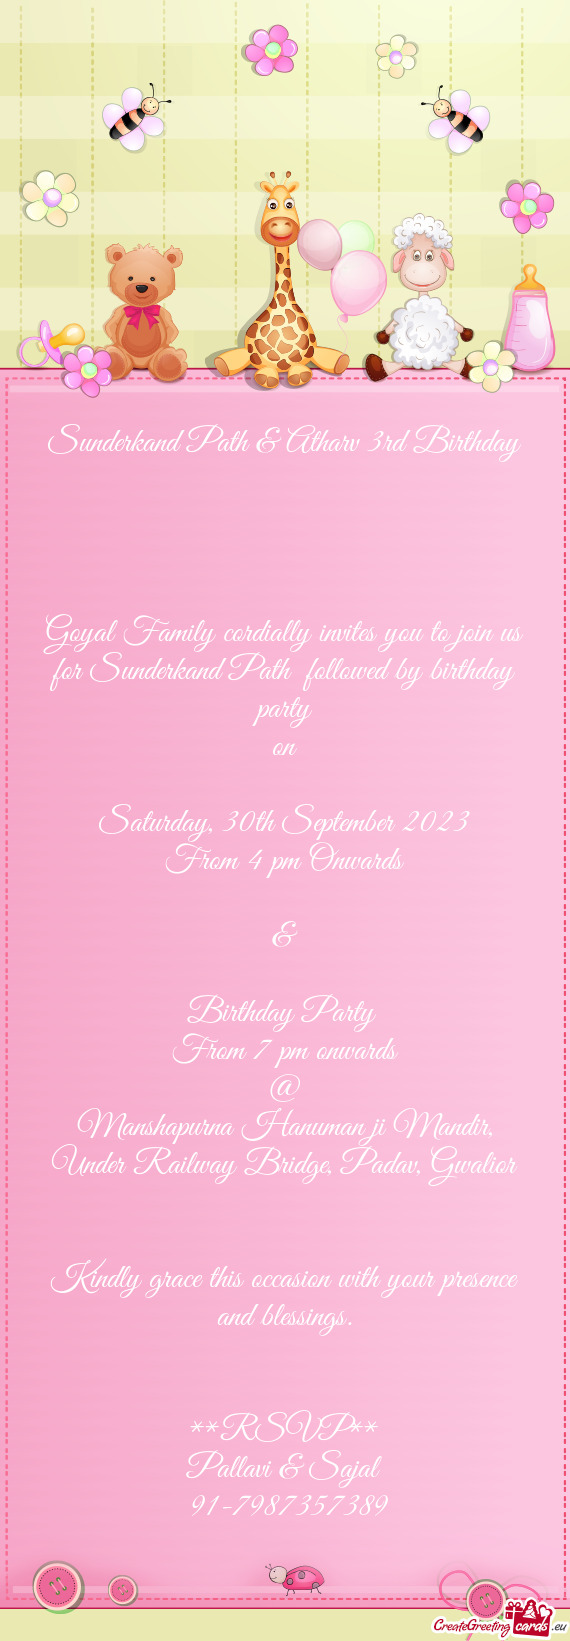 Goyal Family cordially invites you to join us for Sunderkand Path followed by birthday party